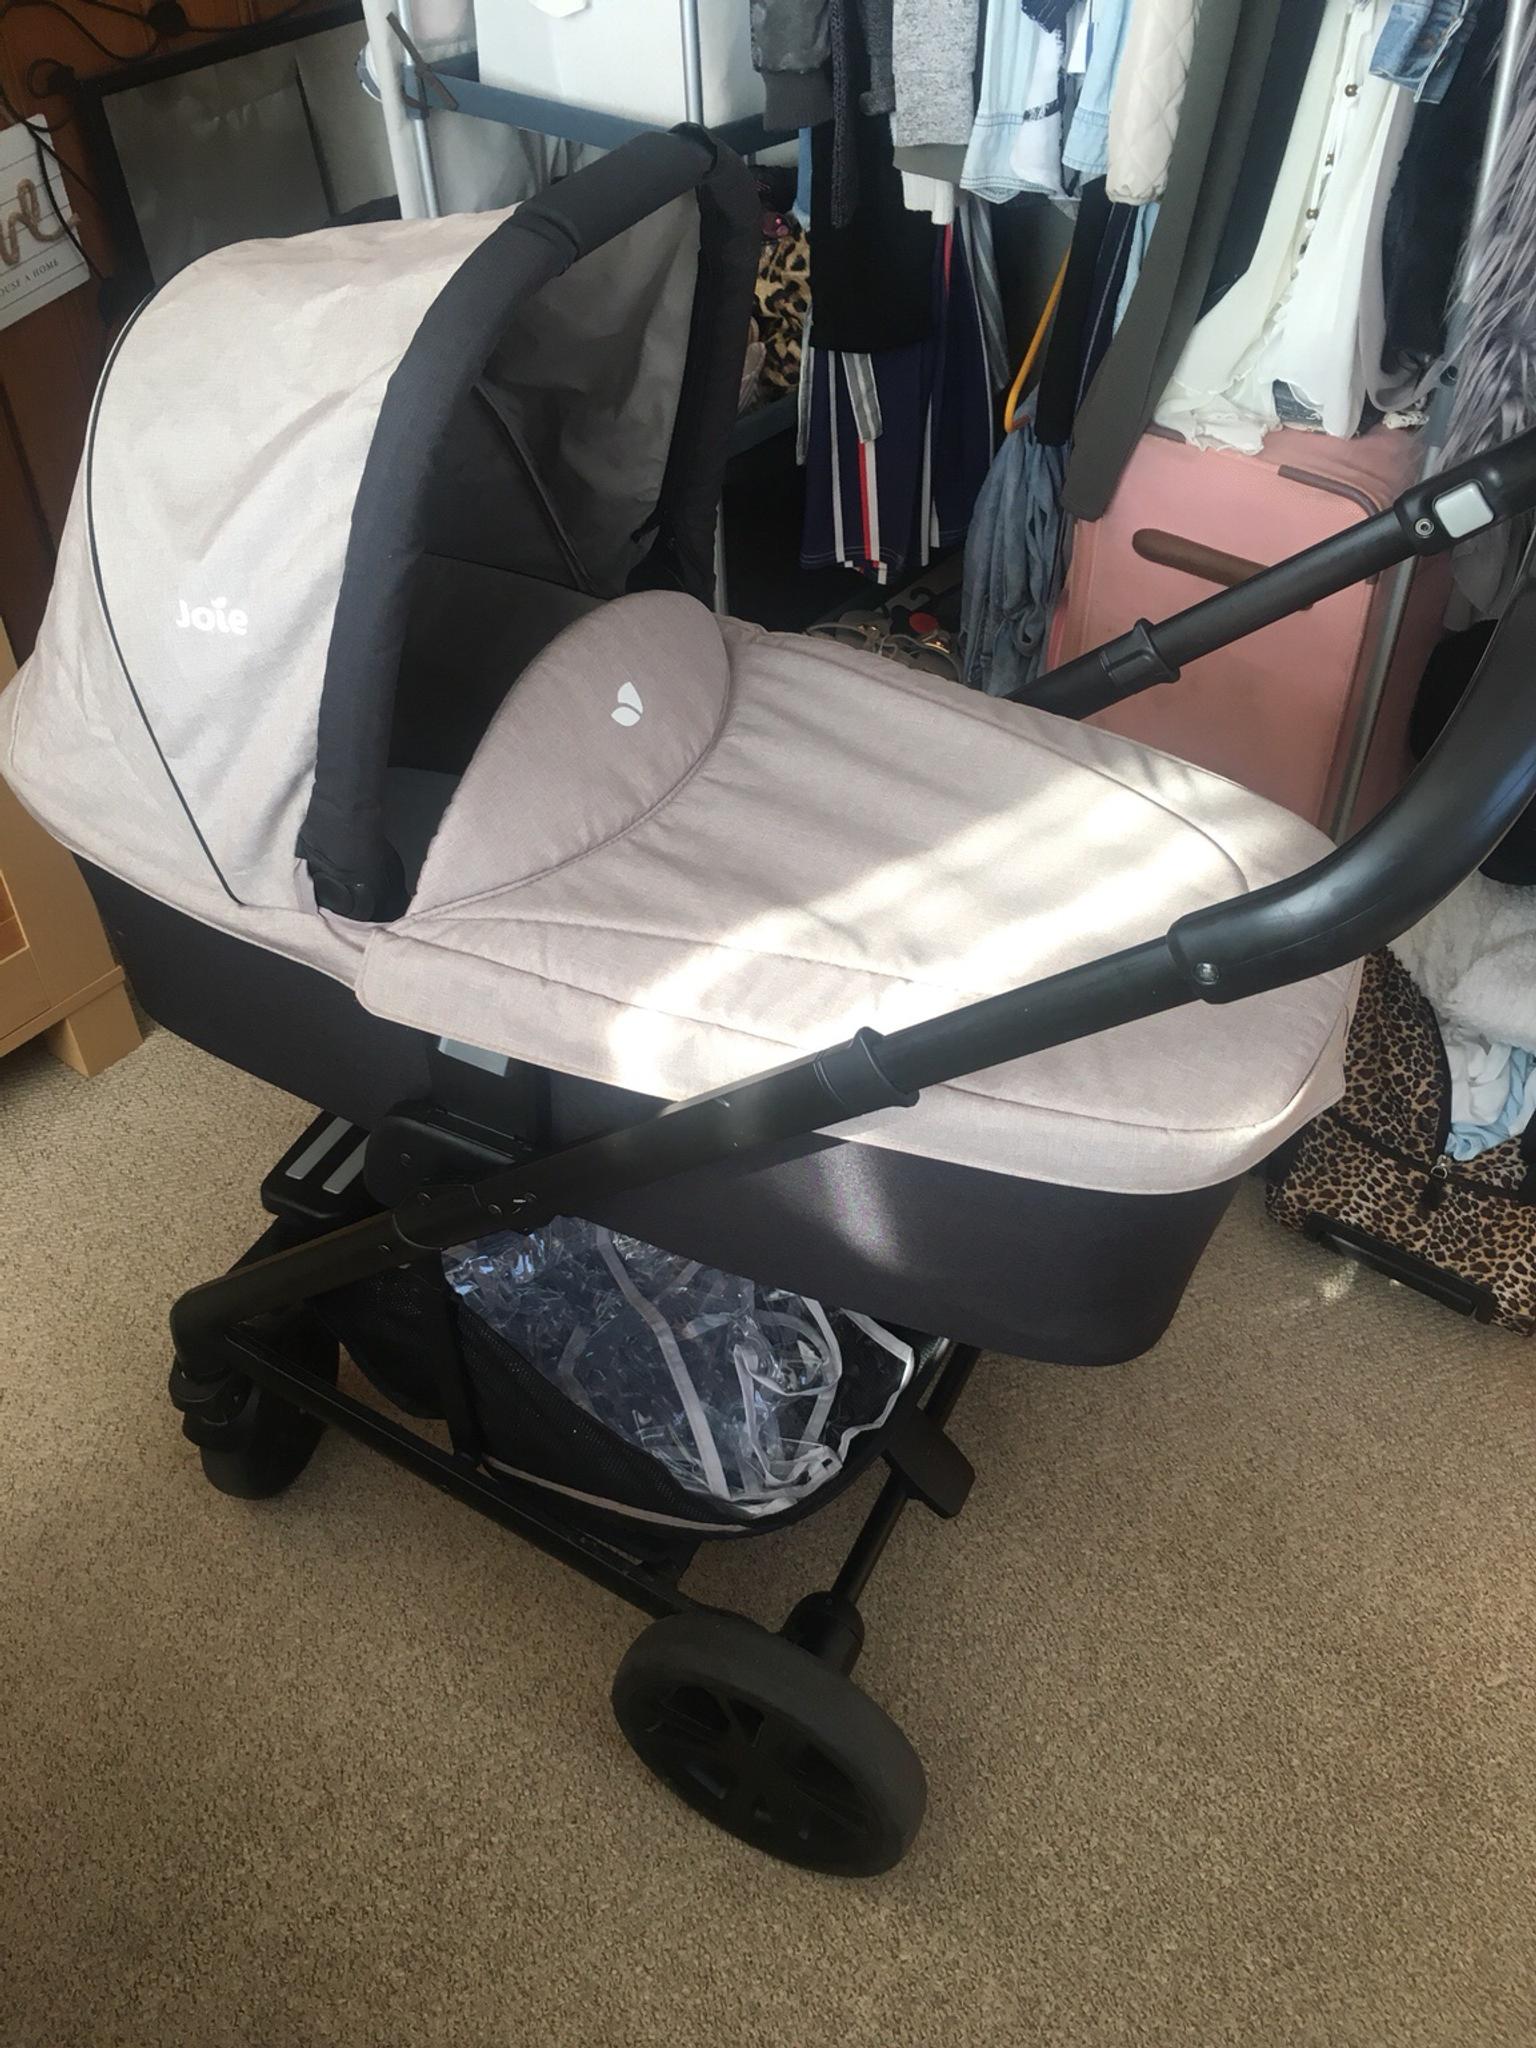 joie chrome scenic stroller & carrycot